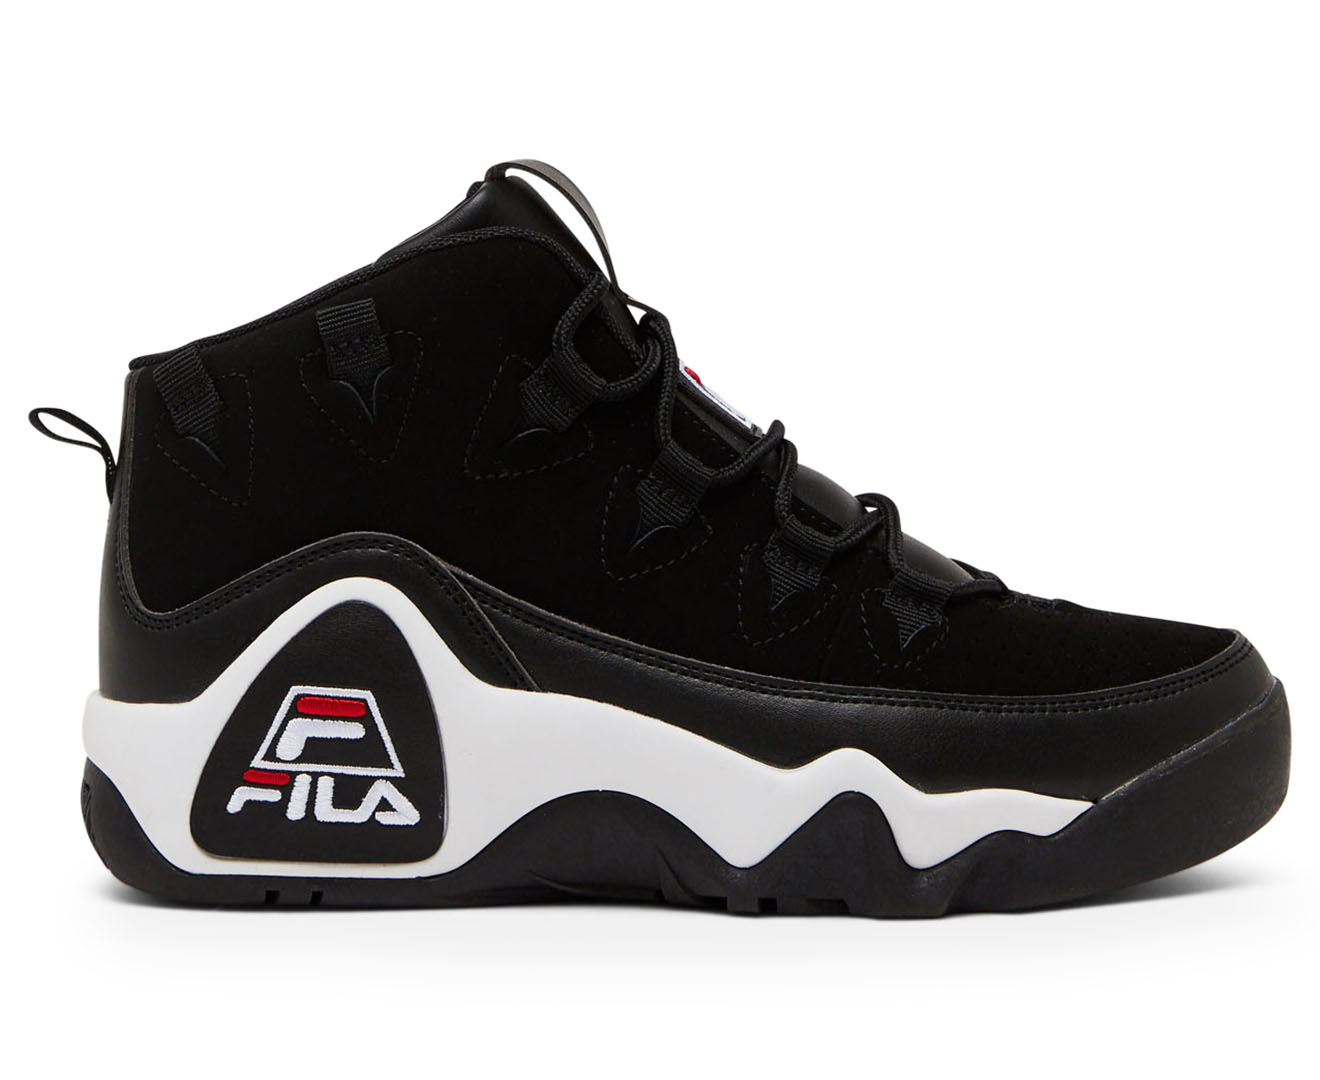 FILA Women's Grant Hill High-Top Sneakers - Black/White/Red | Catch.co.nz